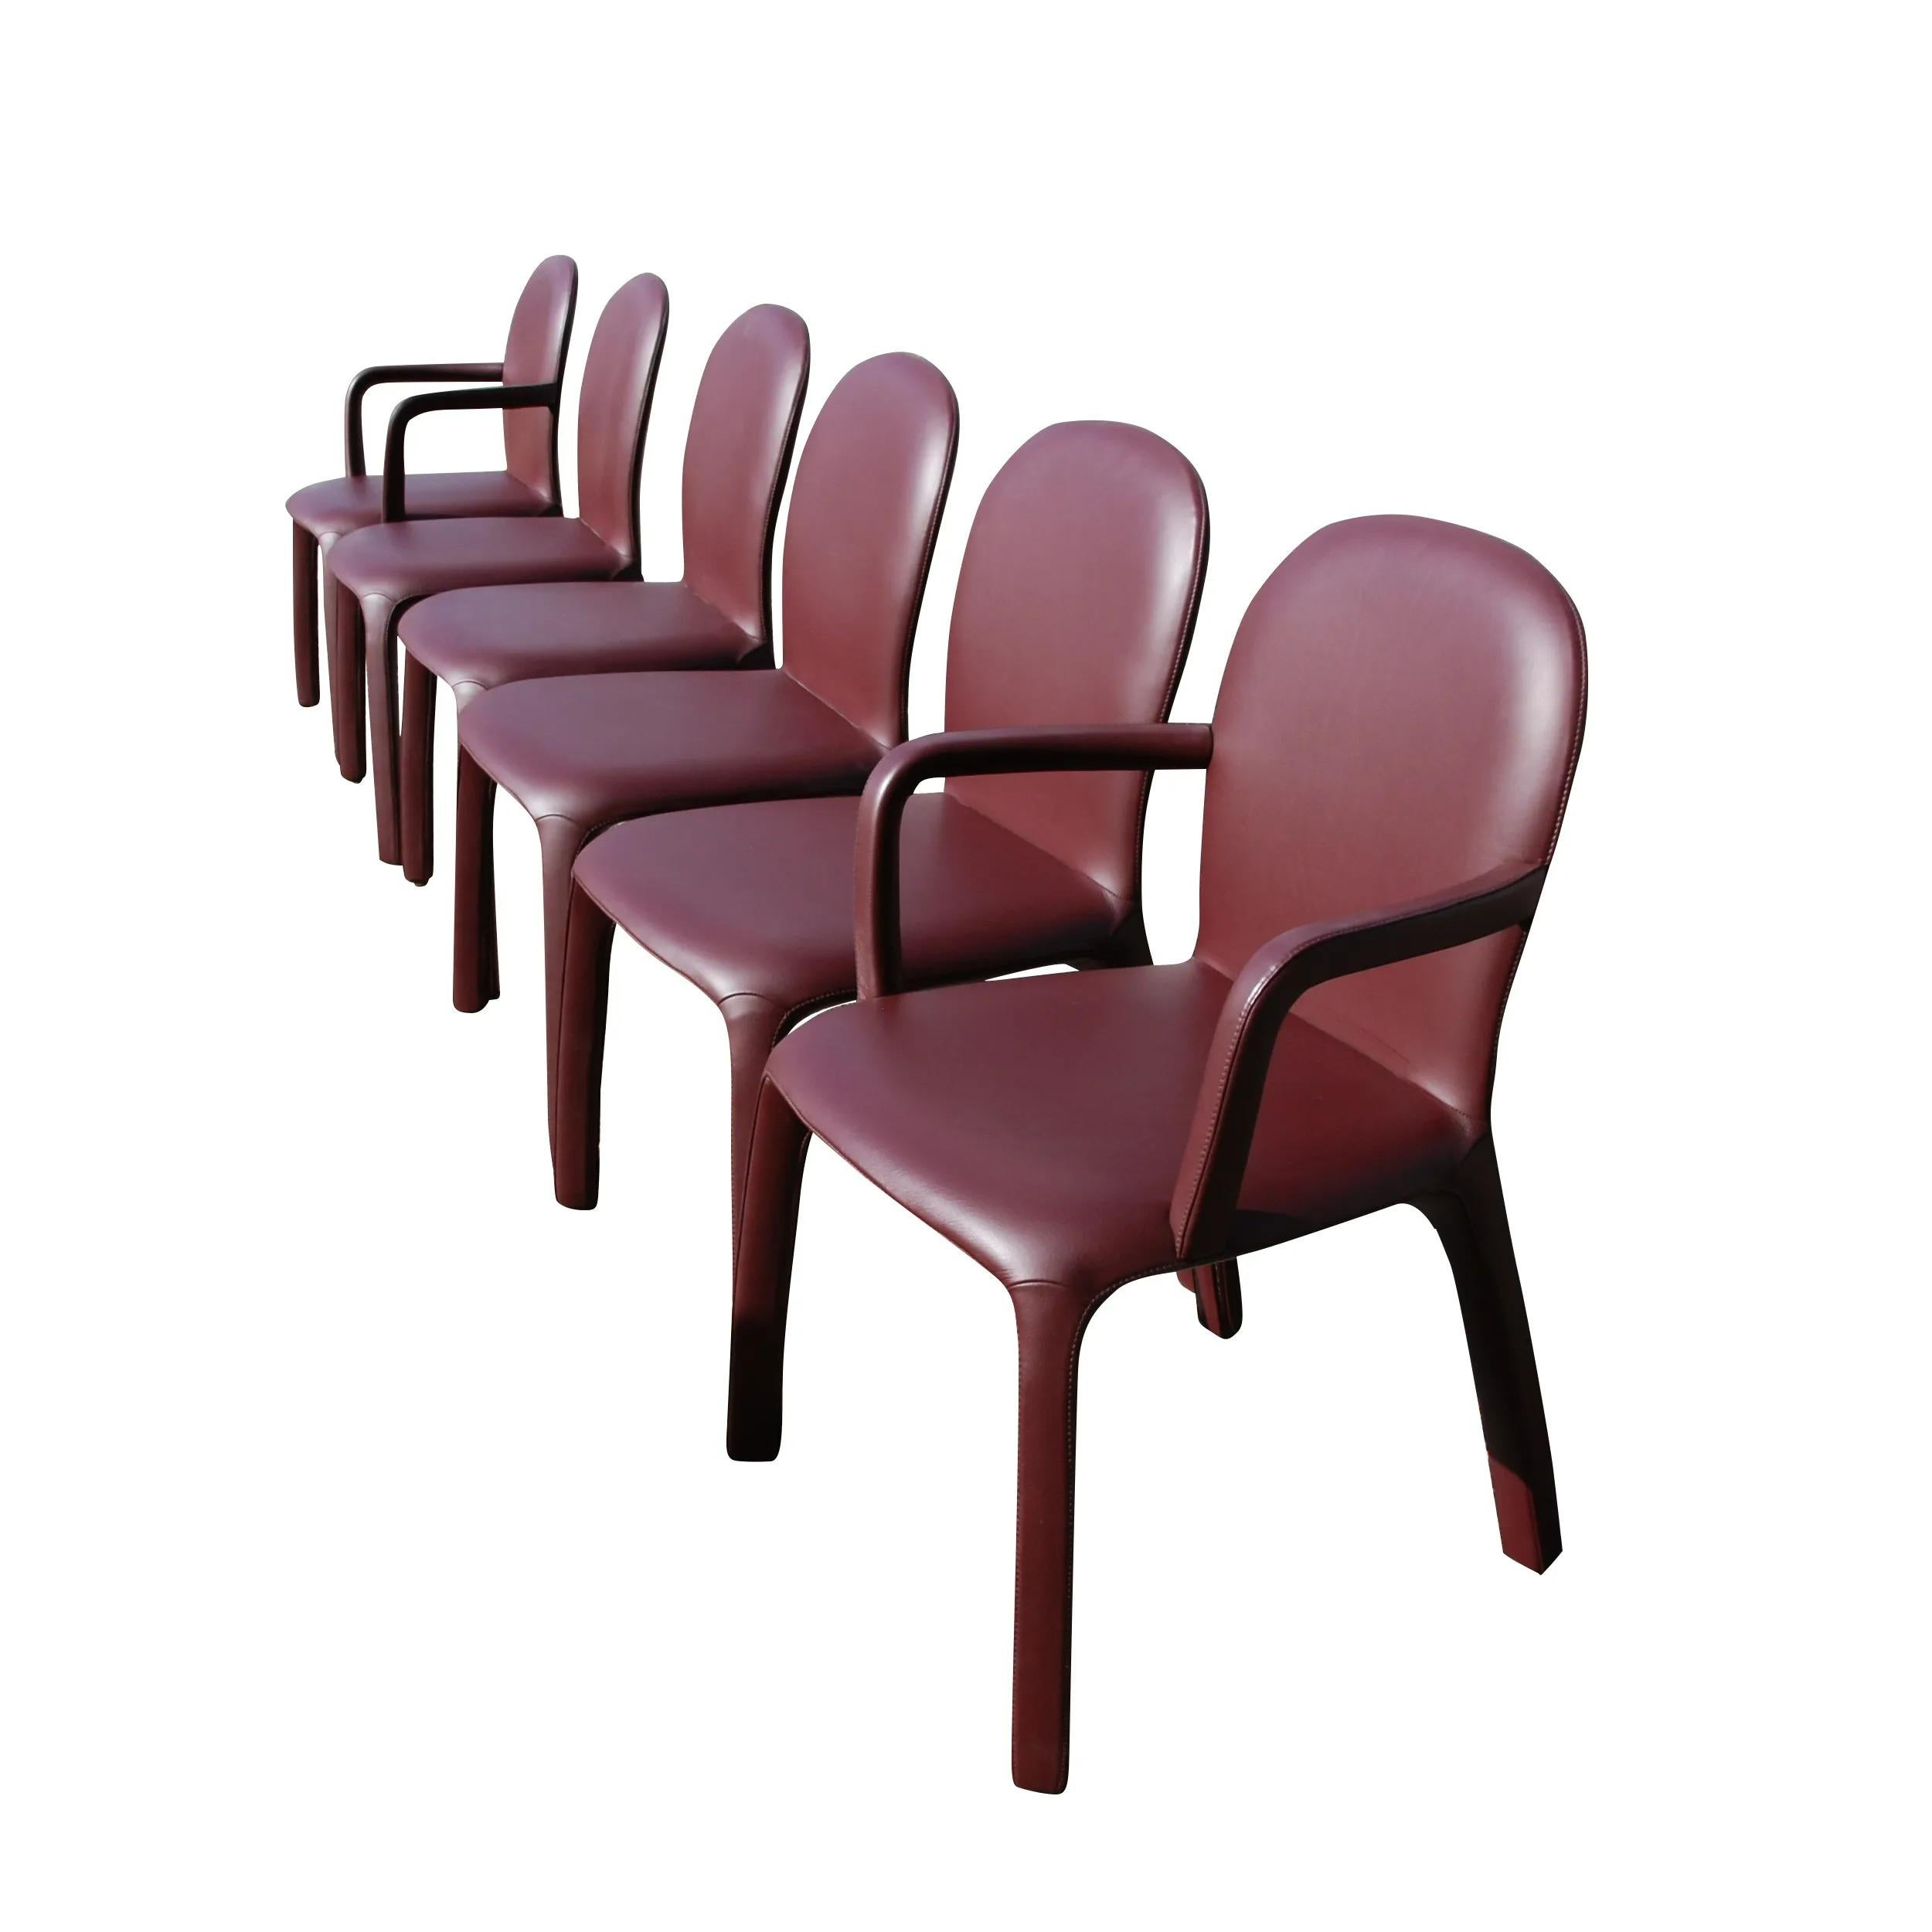 Mid-Century Modern Set of 6 “Amelie” Dining Chairs by Claudio Bellini for Poltrona Frau For Sale